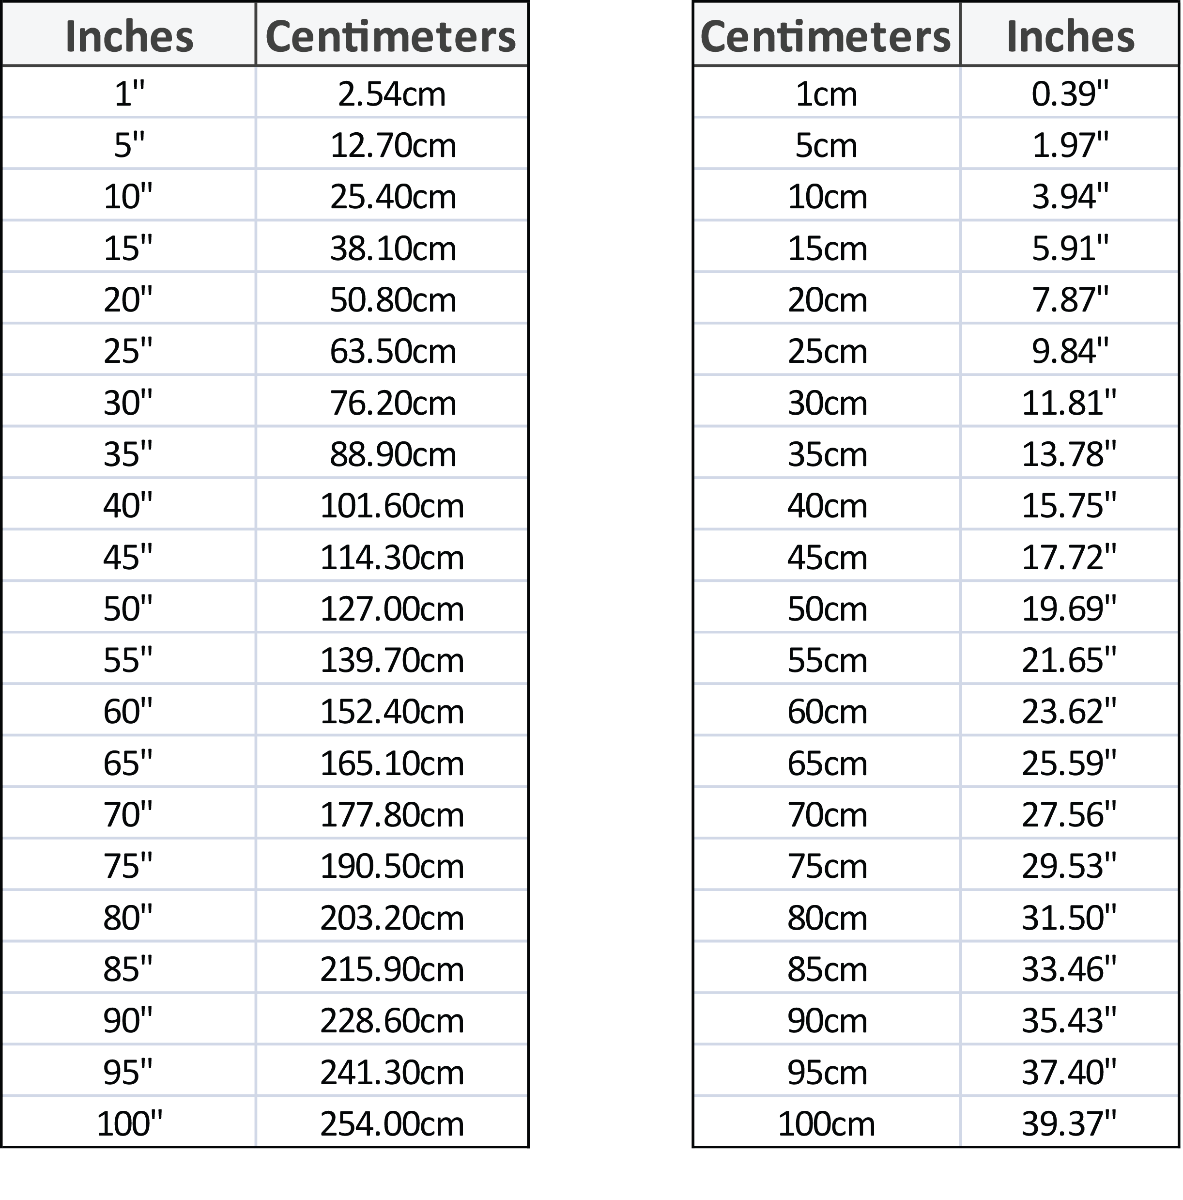 conversion-charts-inch-to-centimeter-sycor-technology